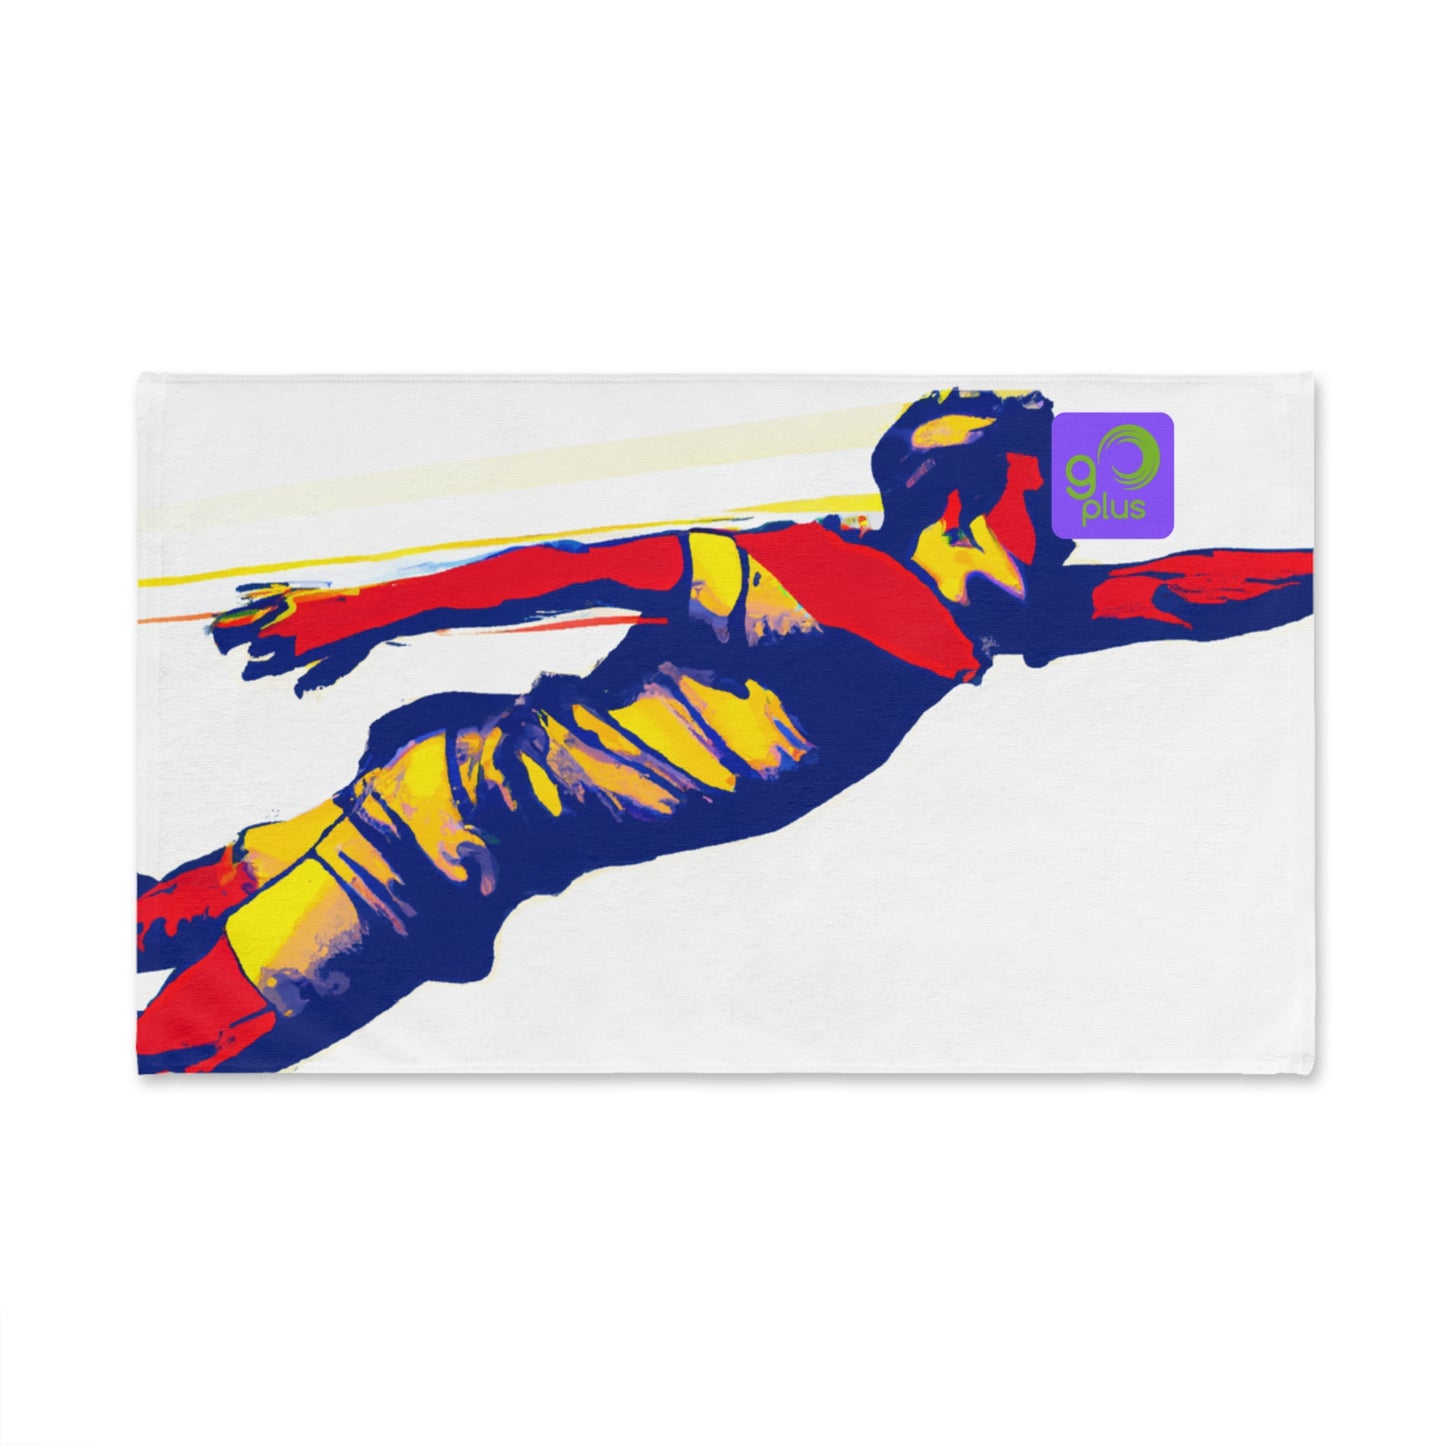 "Dynamic Movement: Celebrating Your Favorite Team or Athlete" - Go Plus Hand towel